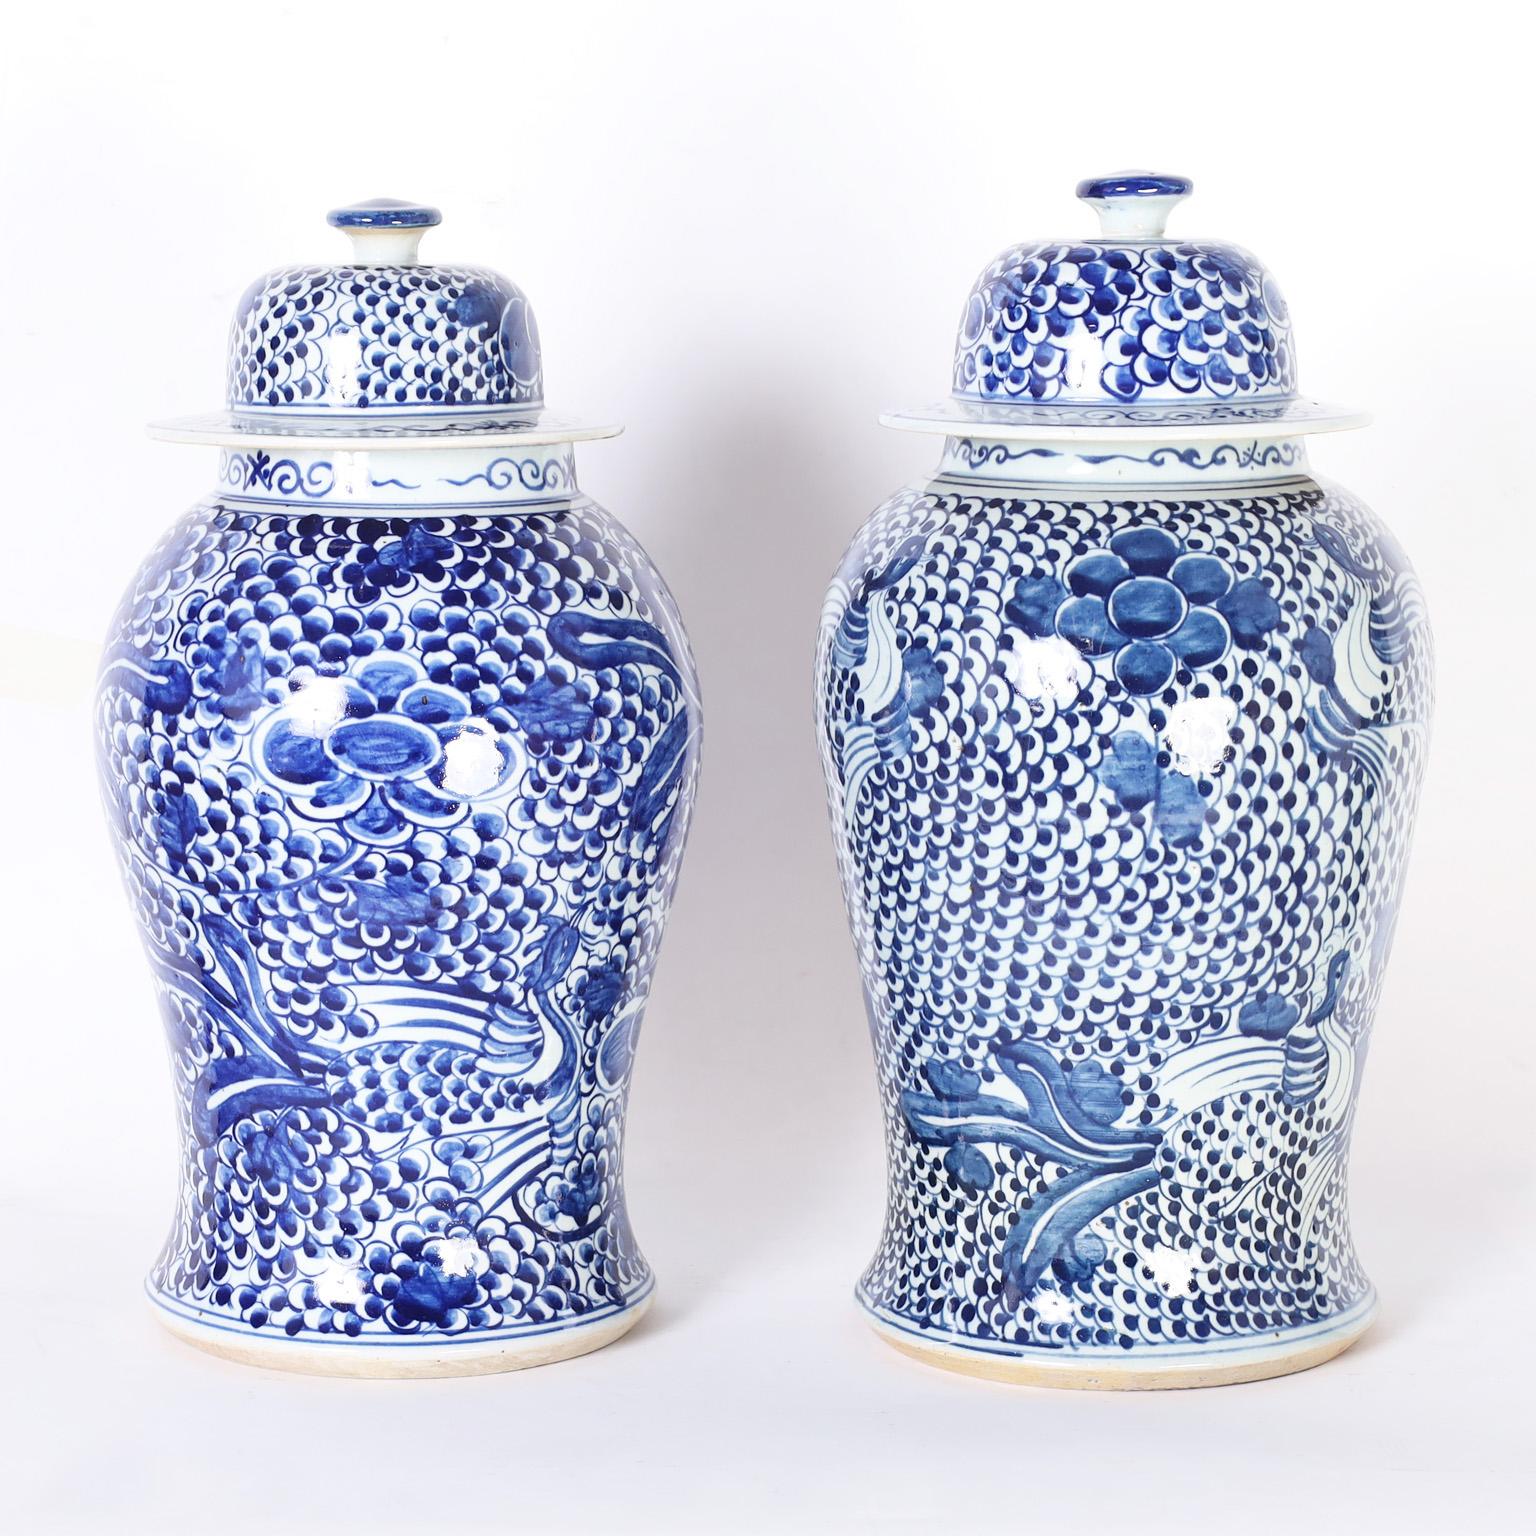 Pair of Chinese blue and white porcelain lidded jars with classic form hand decorated with bold designs of fauna and flora, in the Chinese Export manner.